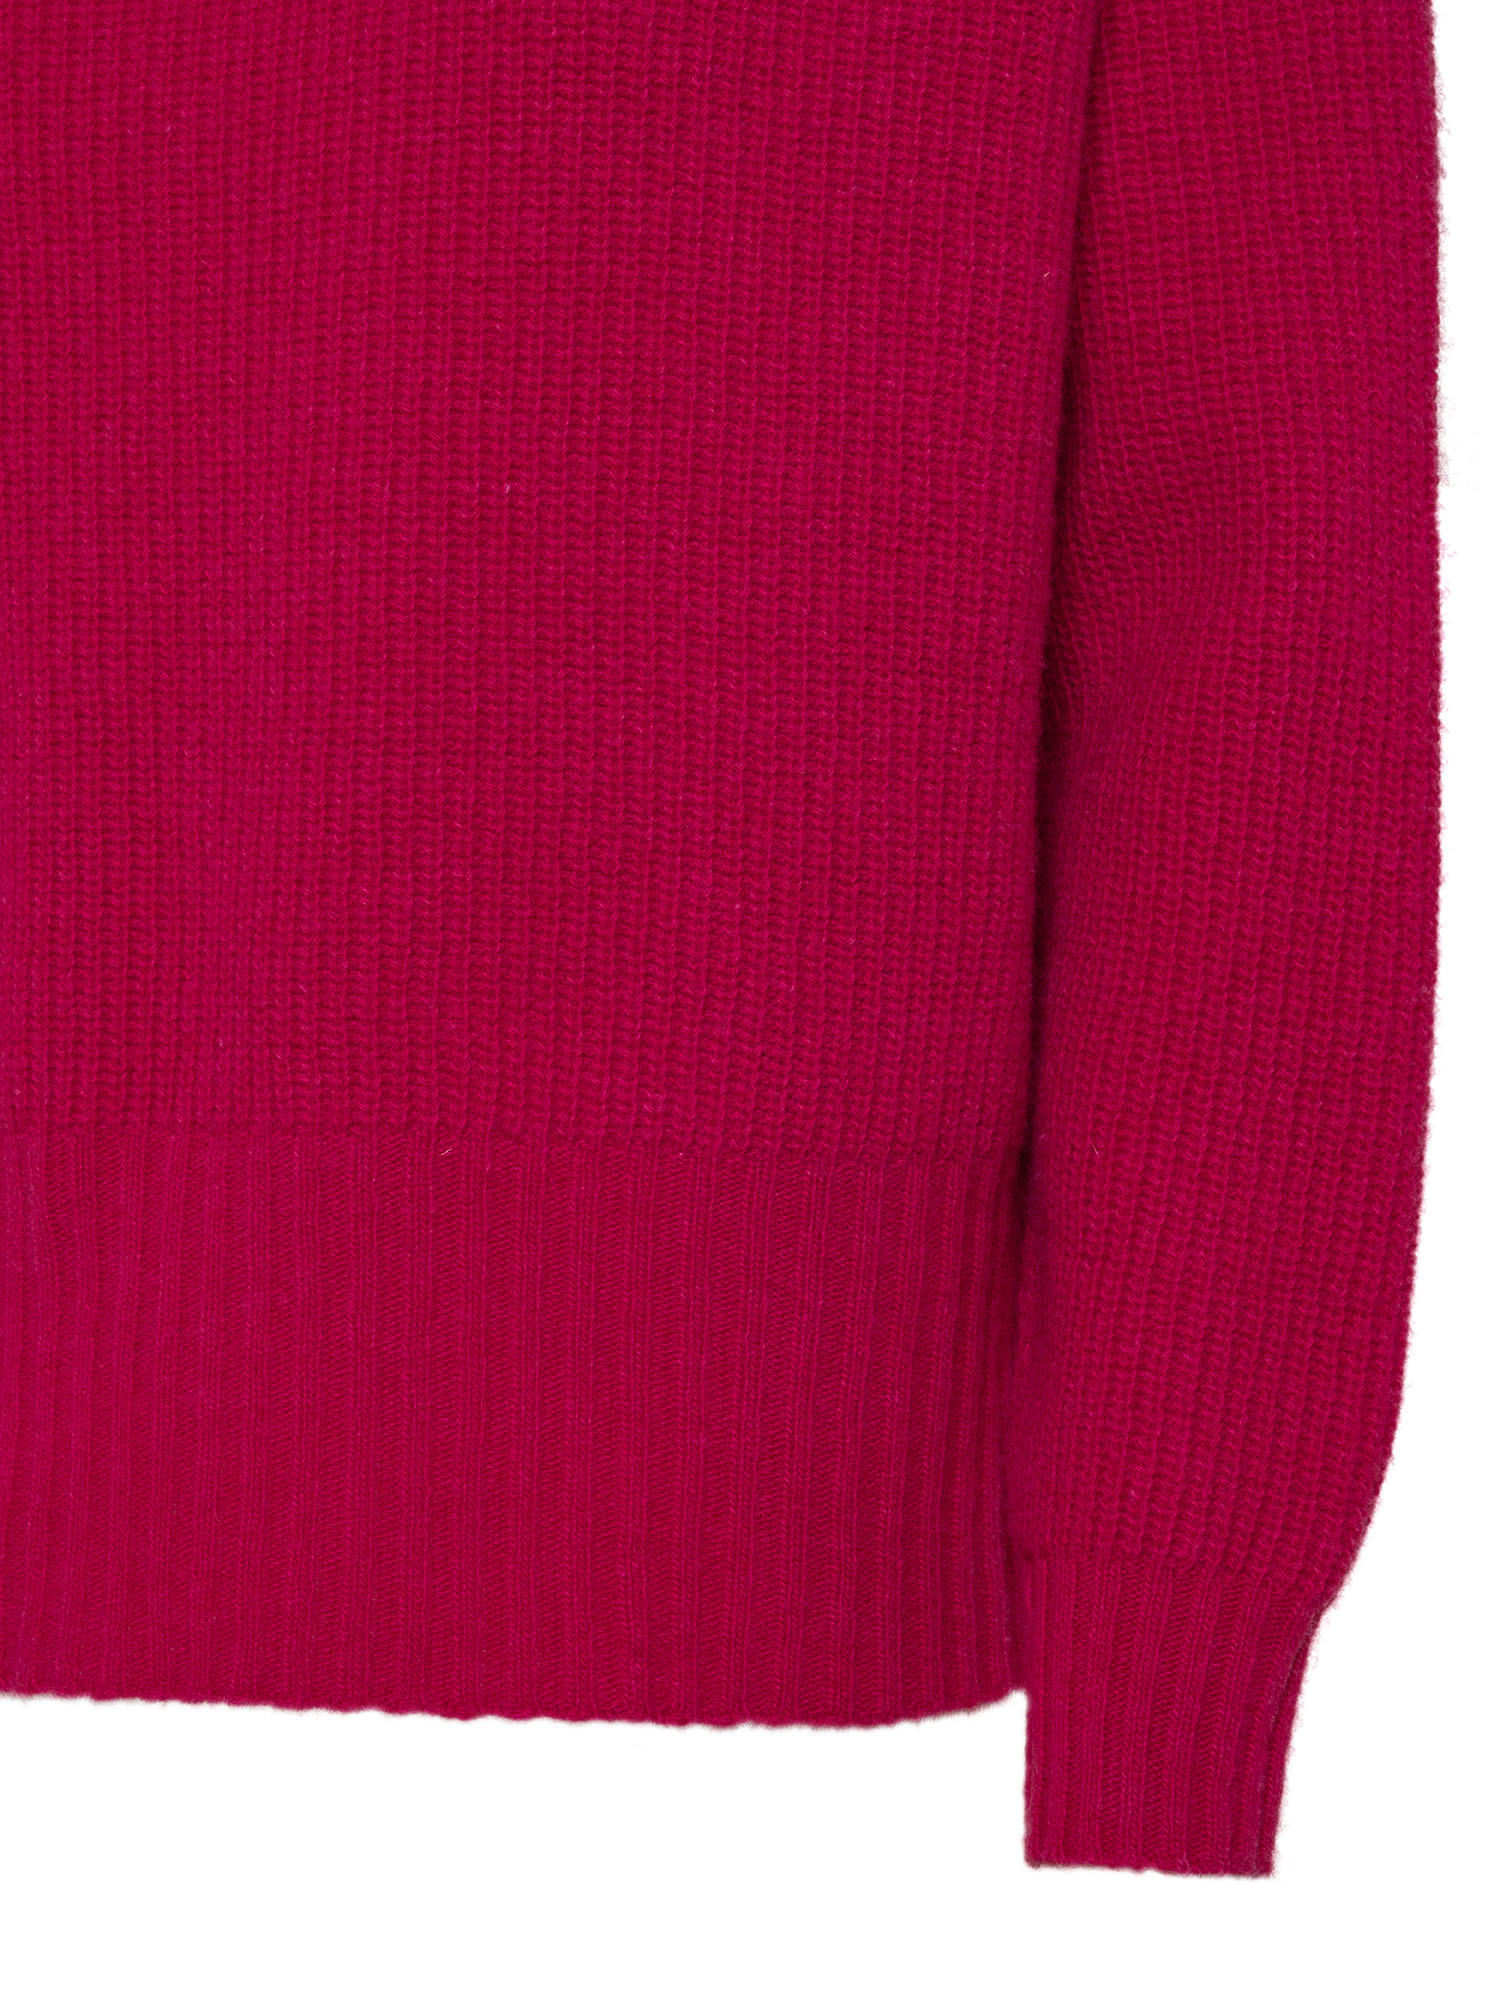 K Collection - Carded wool turtleneck pullover, Pink Fuchsia, large image number 2